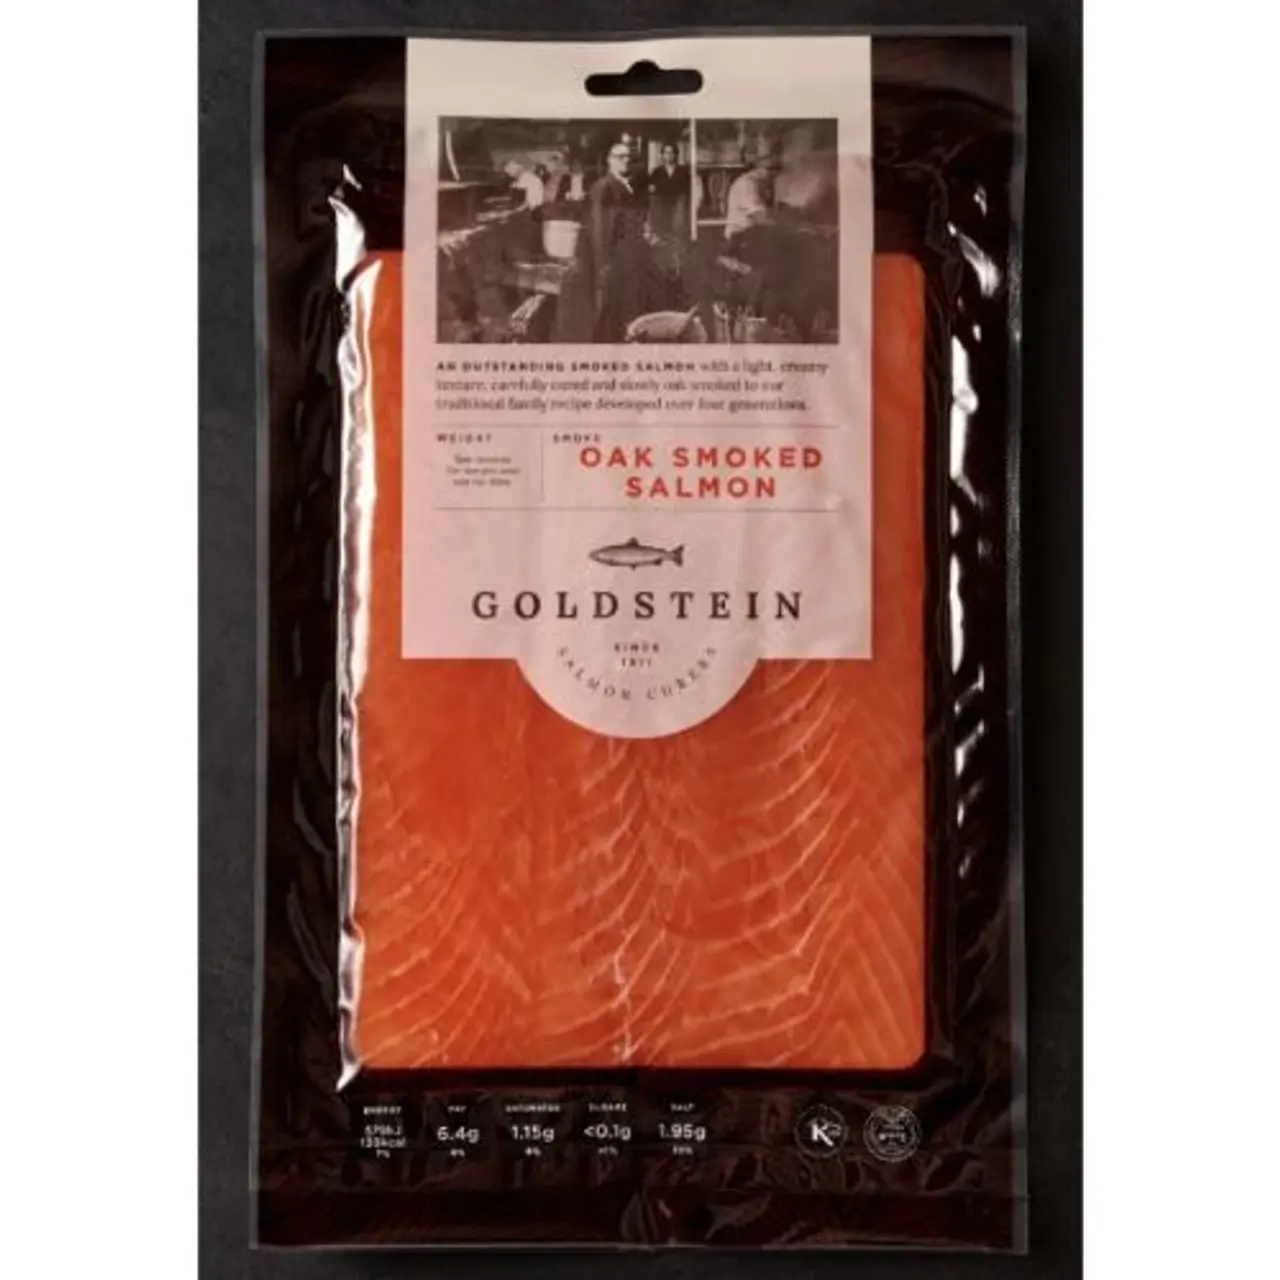 goldstein smoked salmon - Who makes the best smoked salmon in the world